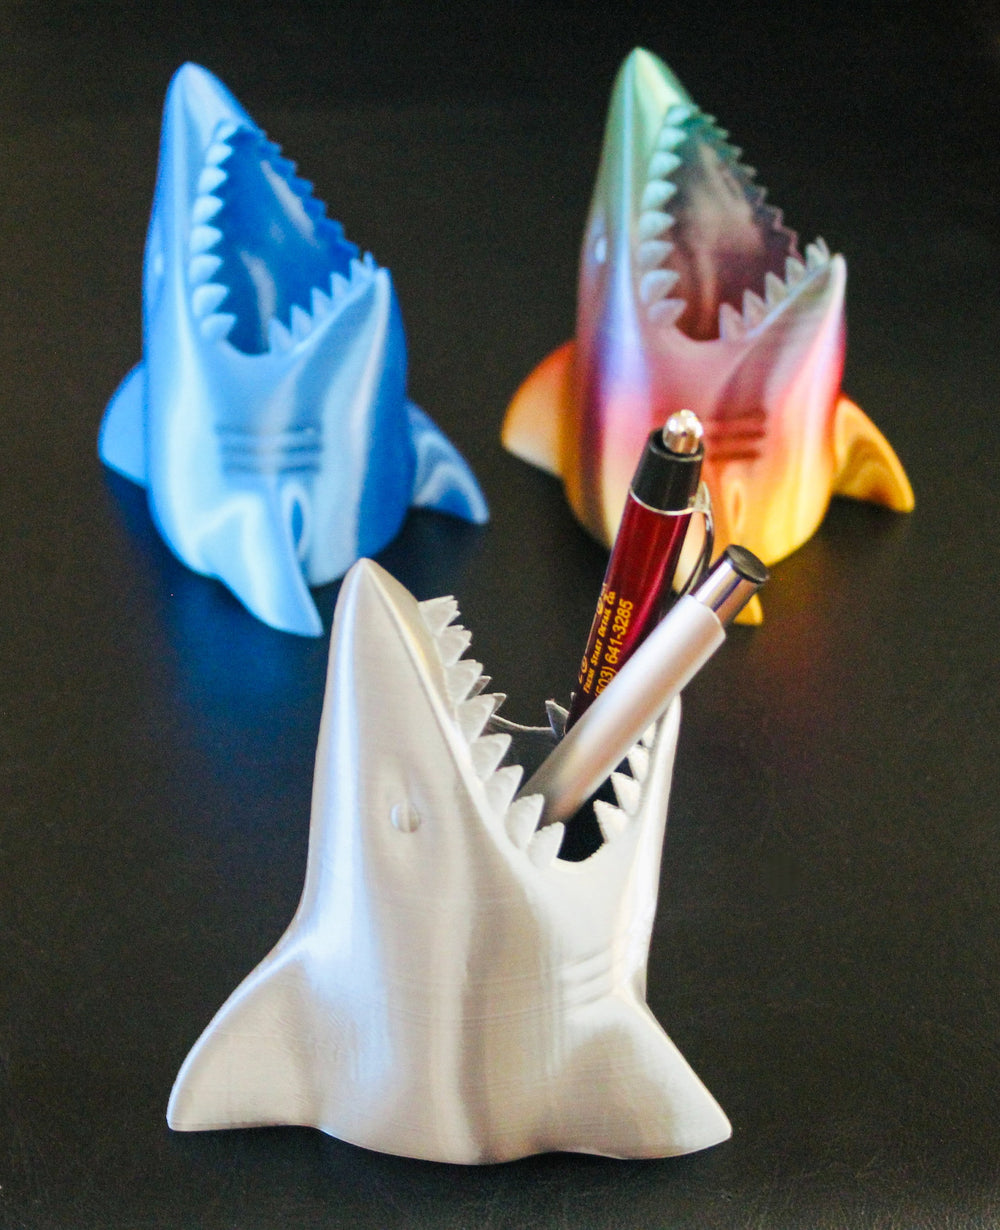 
  
  Shark Pen and Pencil Holder for your Office or School Desk
  
